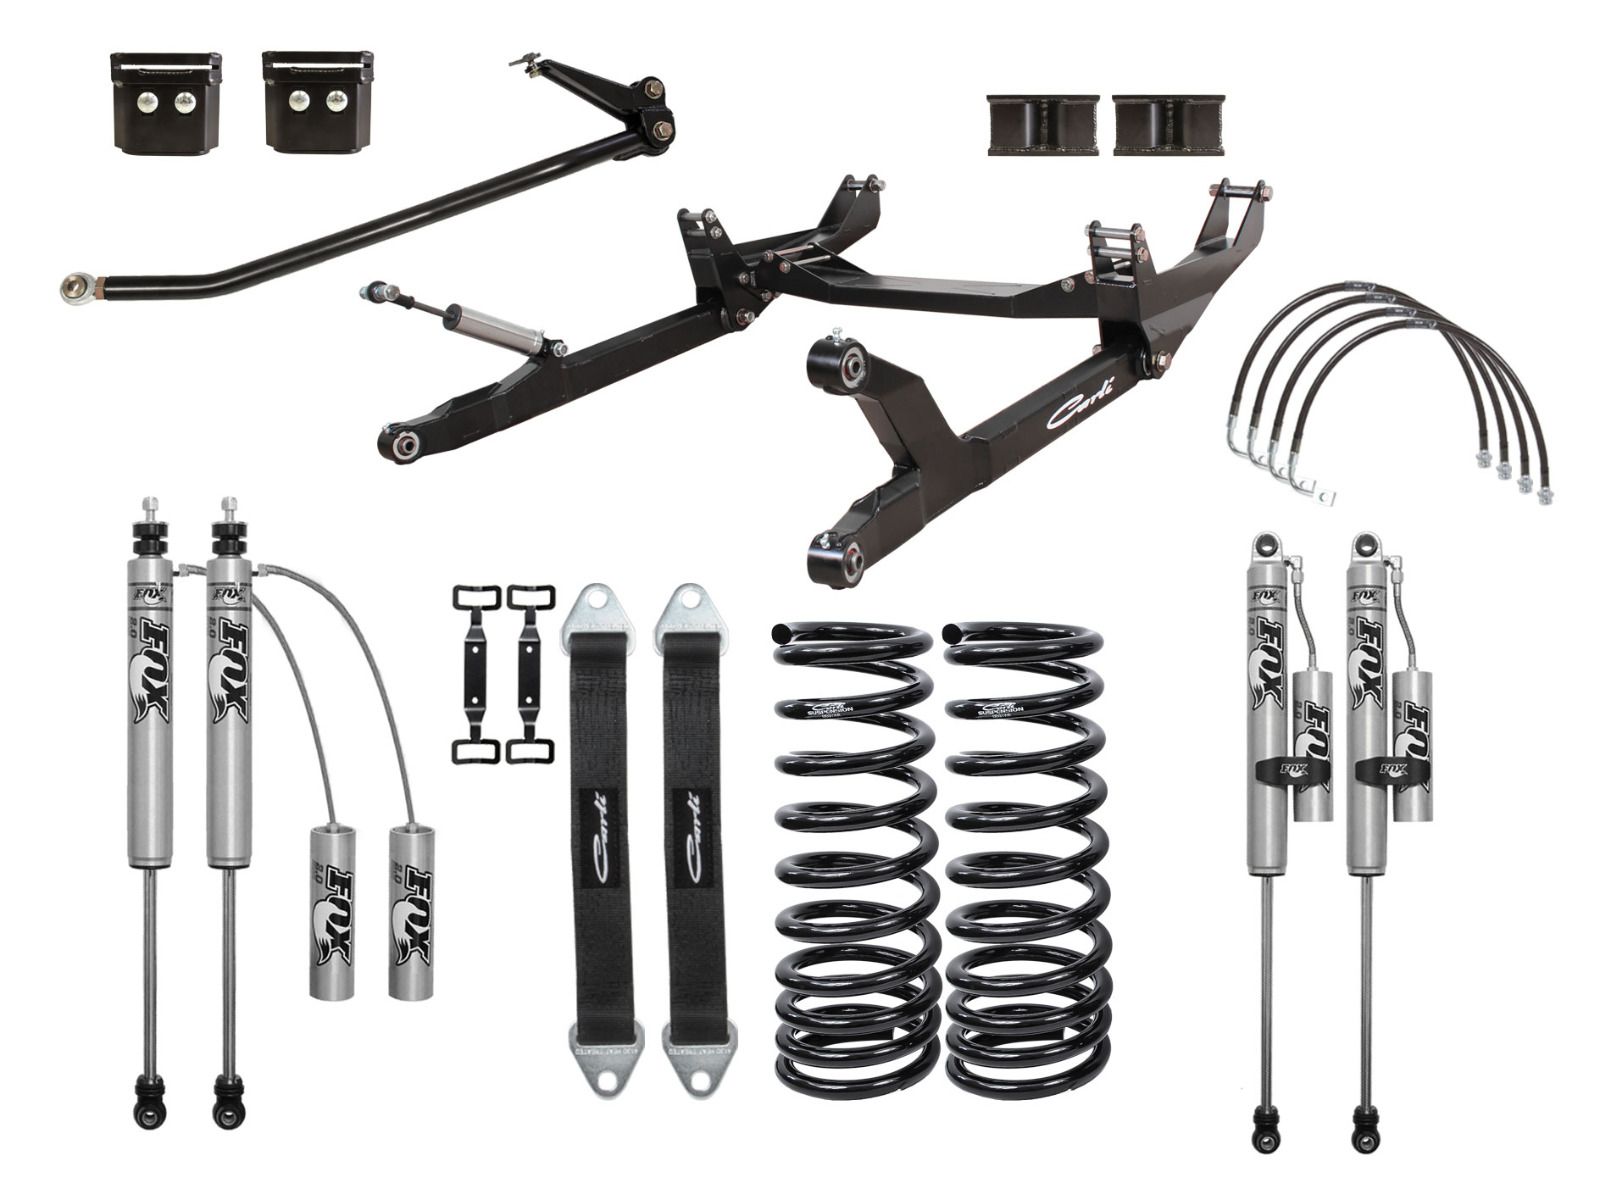 6" 2012-2013 Dodge Ram 2500 4wd (w/Diesel Engine) Backcountry Lift System by Carli Suspension